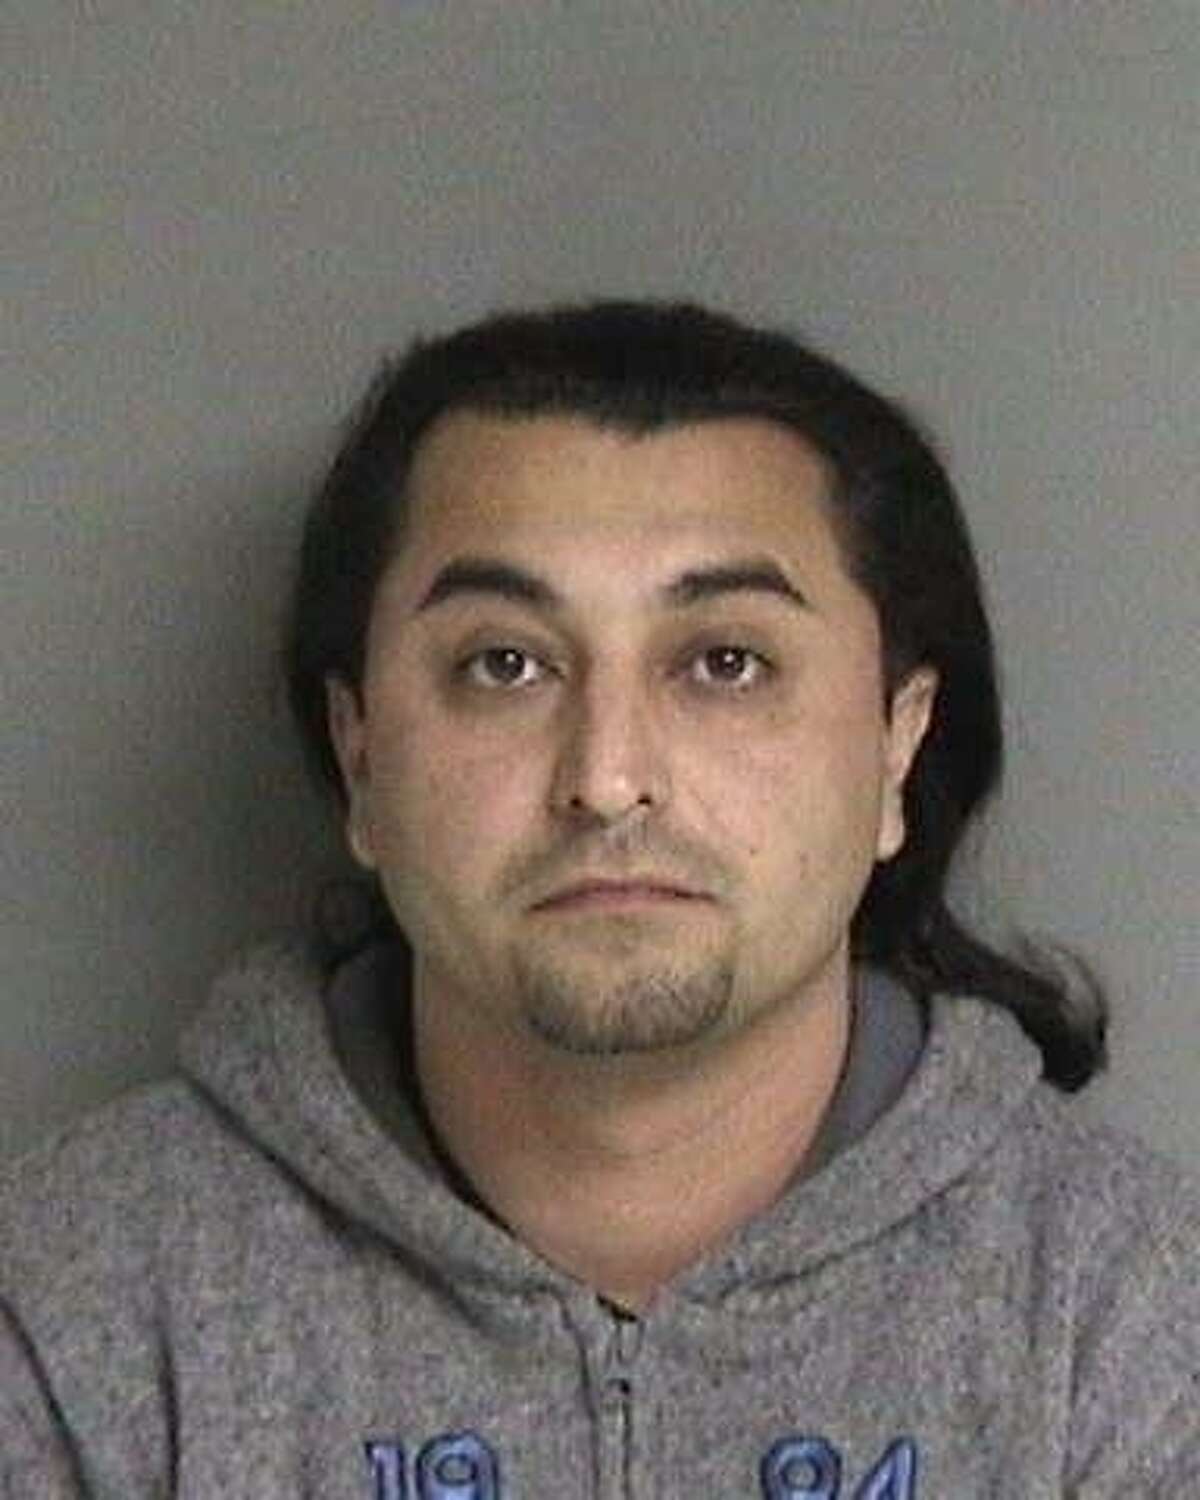 Assif Mayar, who allegedly had an alligator guarding 34 pounds of marijuana in his Castro Valley home.